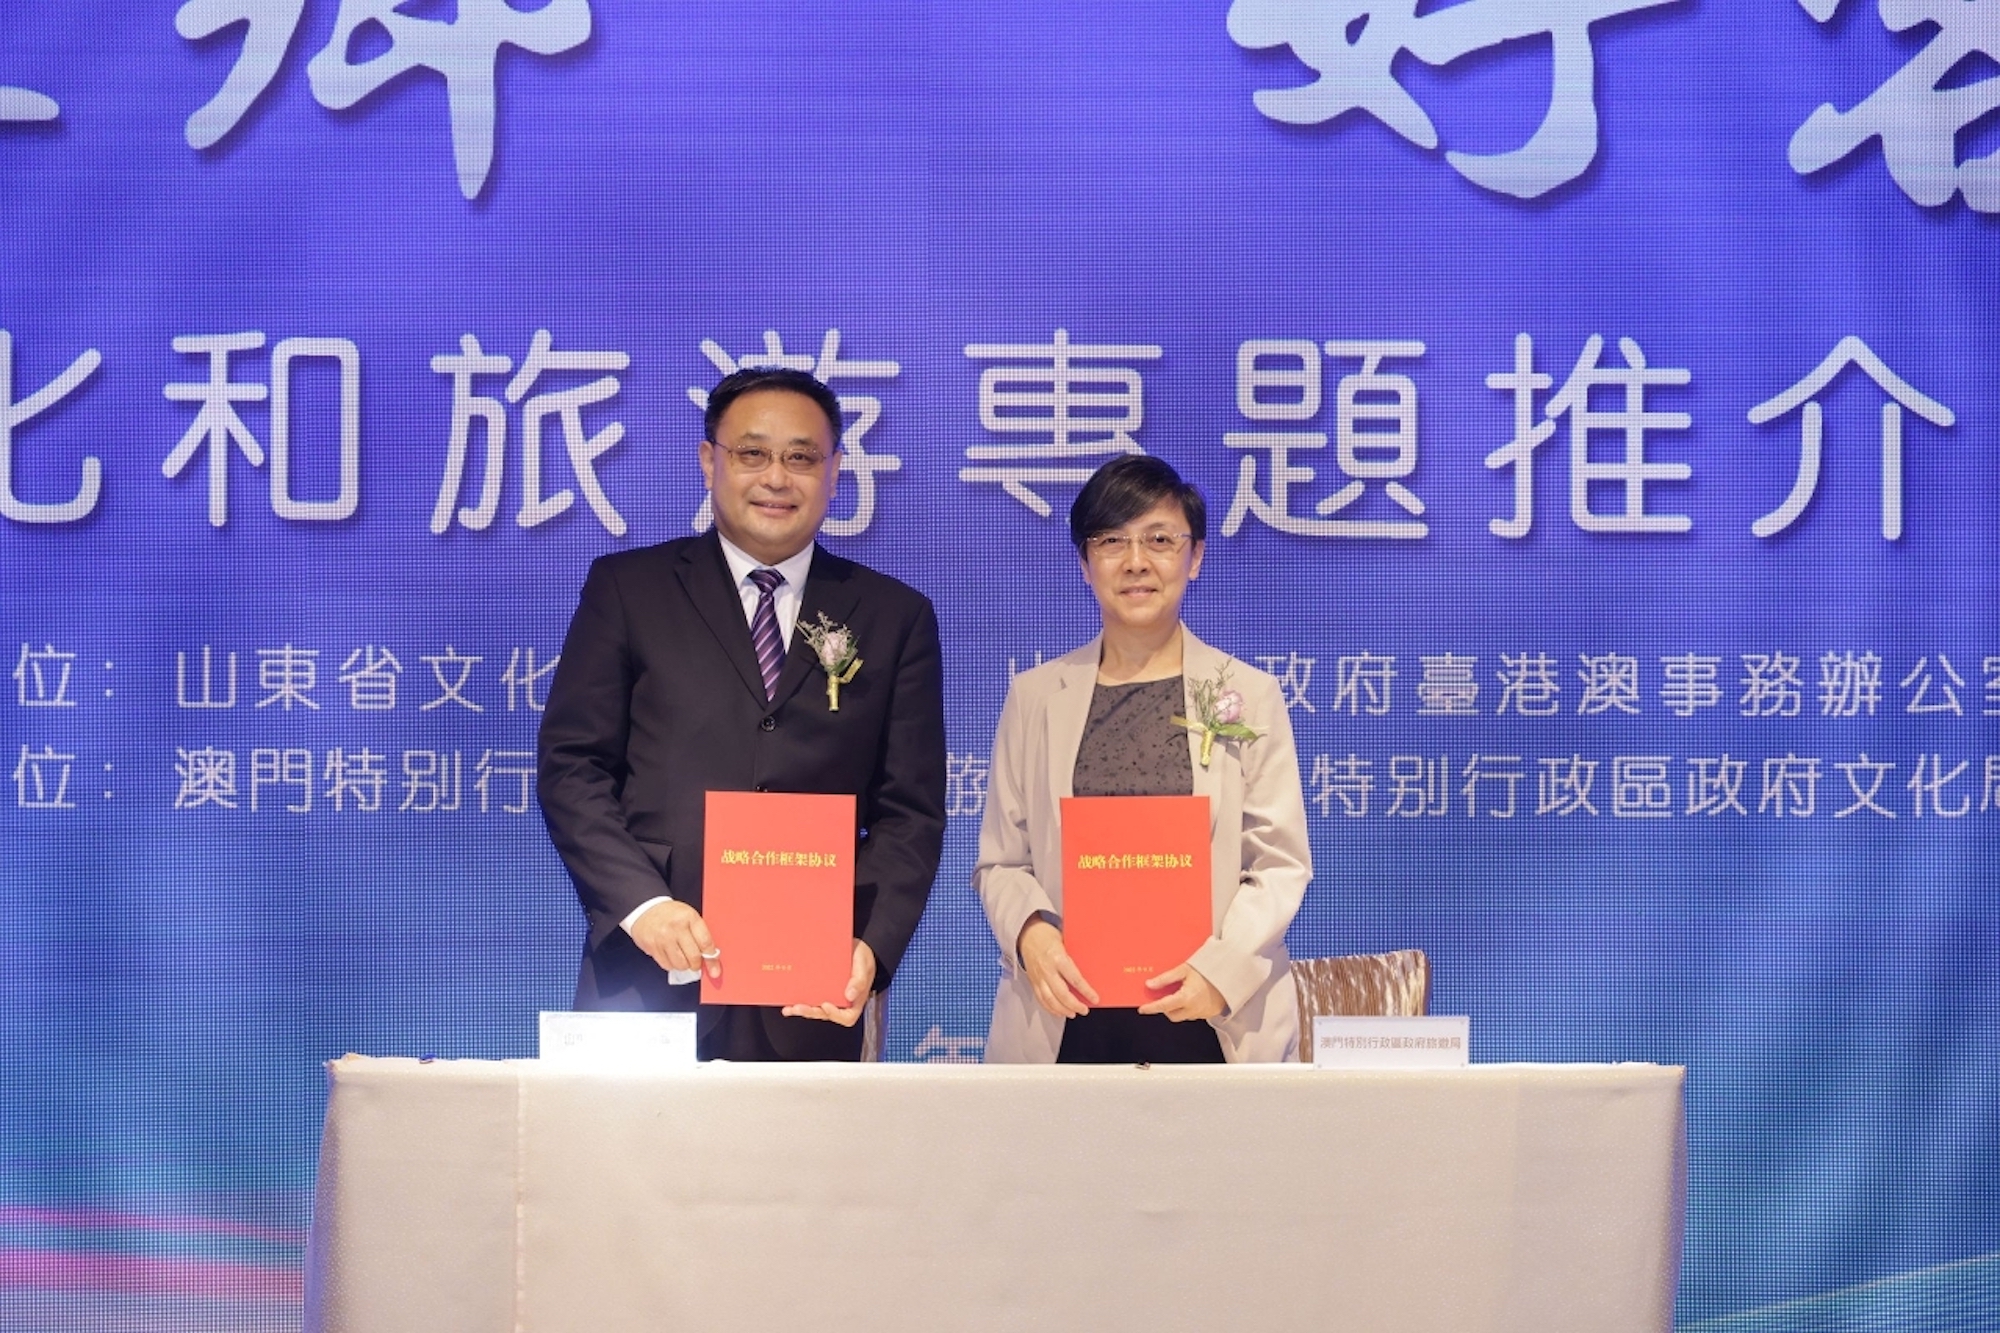 Macao and Shandong sign tourism cooperation agreement